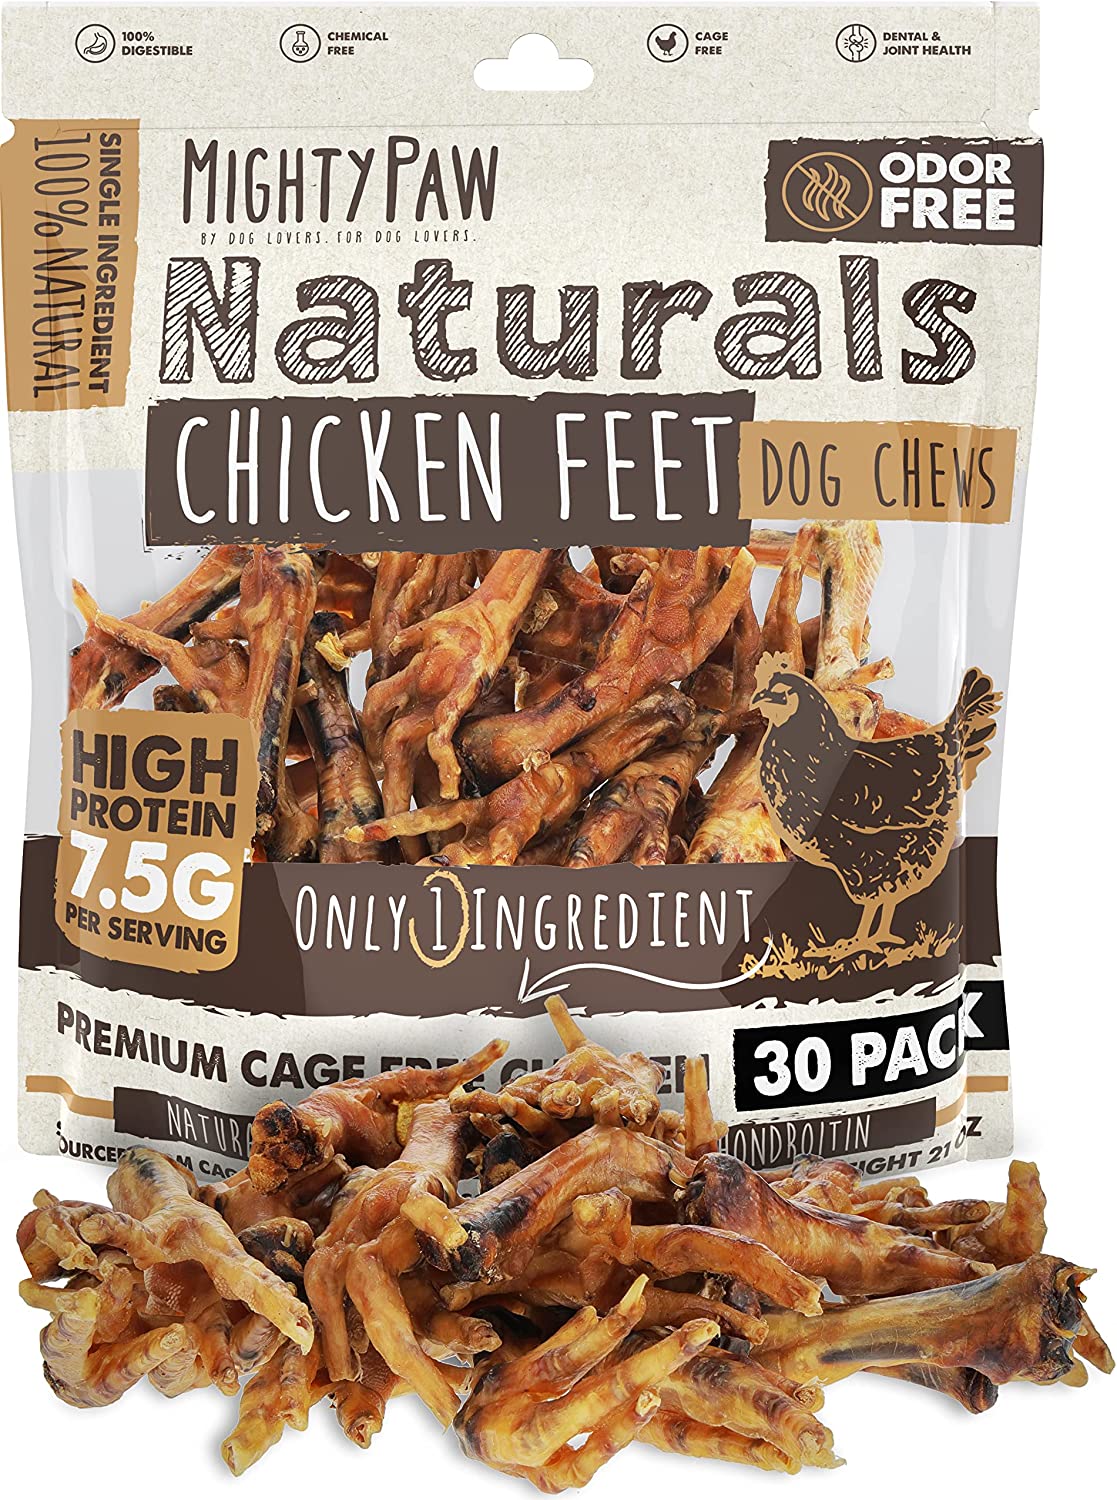 Mighty Paw Chicken Feet Dog Chews: Crunchy and Nutritious Treats